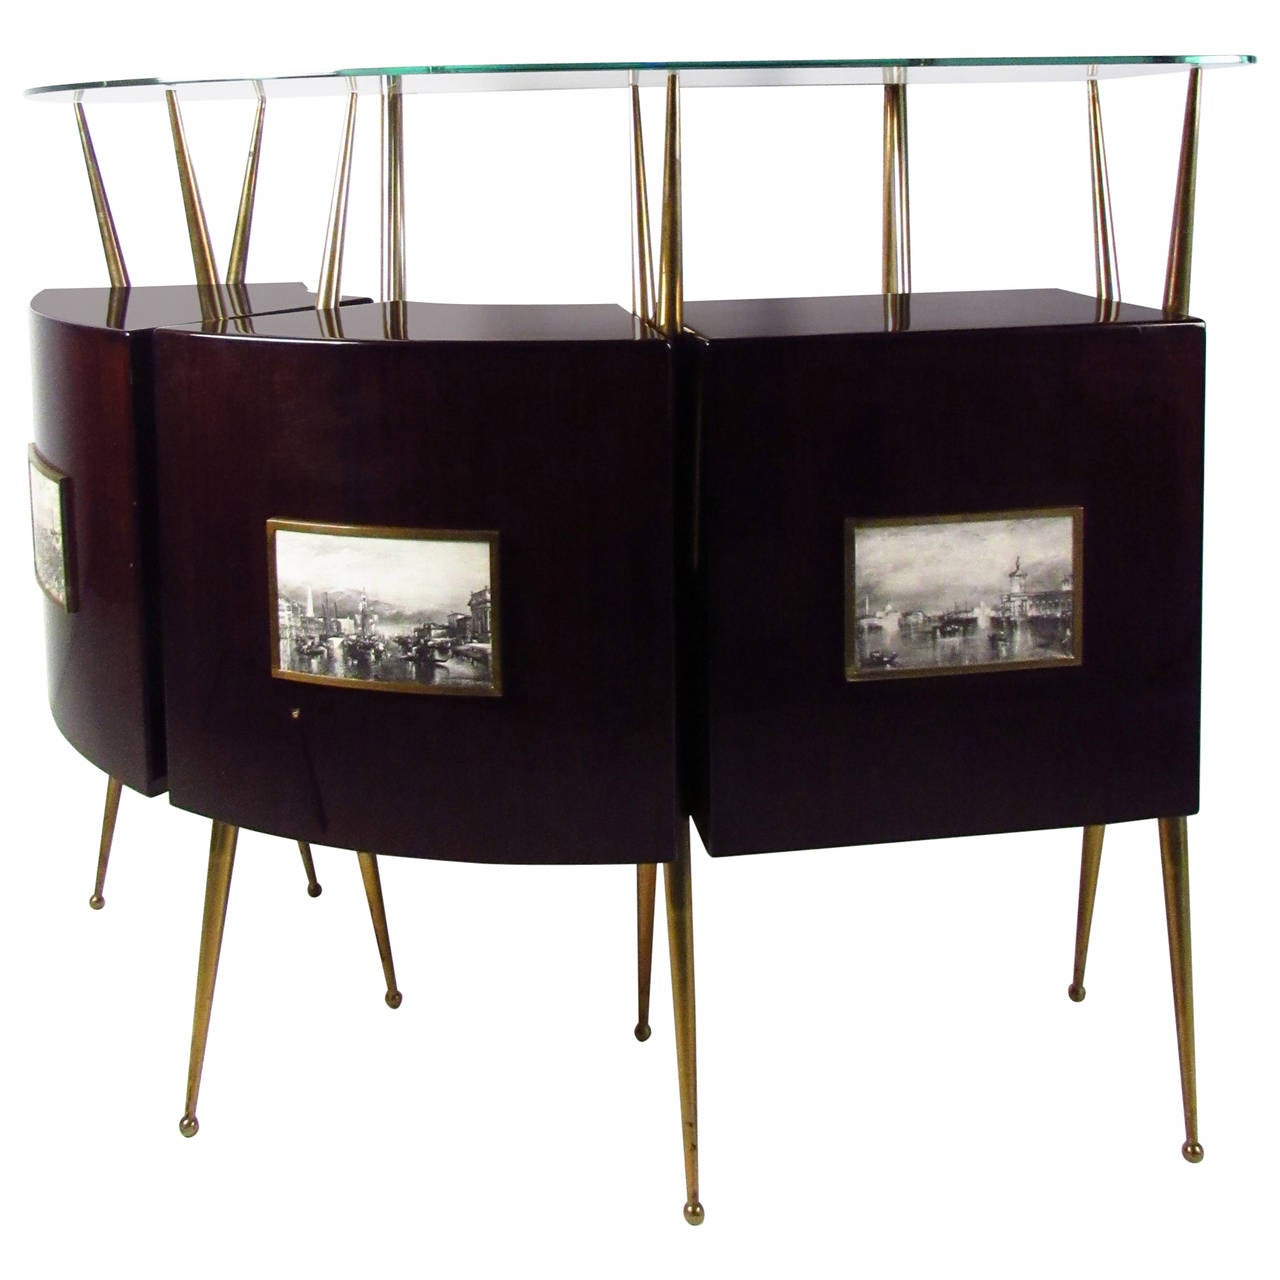 Striking Italian 1950's dry bar in rosewood with glass top and sculpted brass legs. Designed in the style of Gio Ponti. Pair of matching stools included.

Liquor cabinet dimensions - 35W 11D 77H

Please confirm item location NY or NJ with dealer.